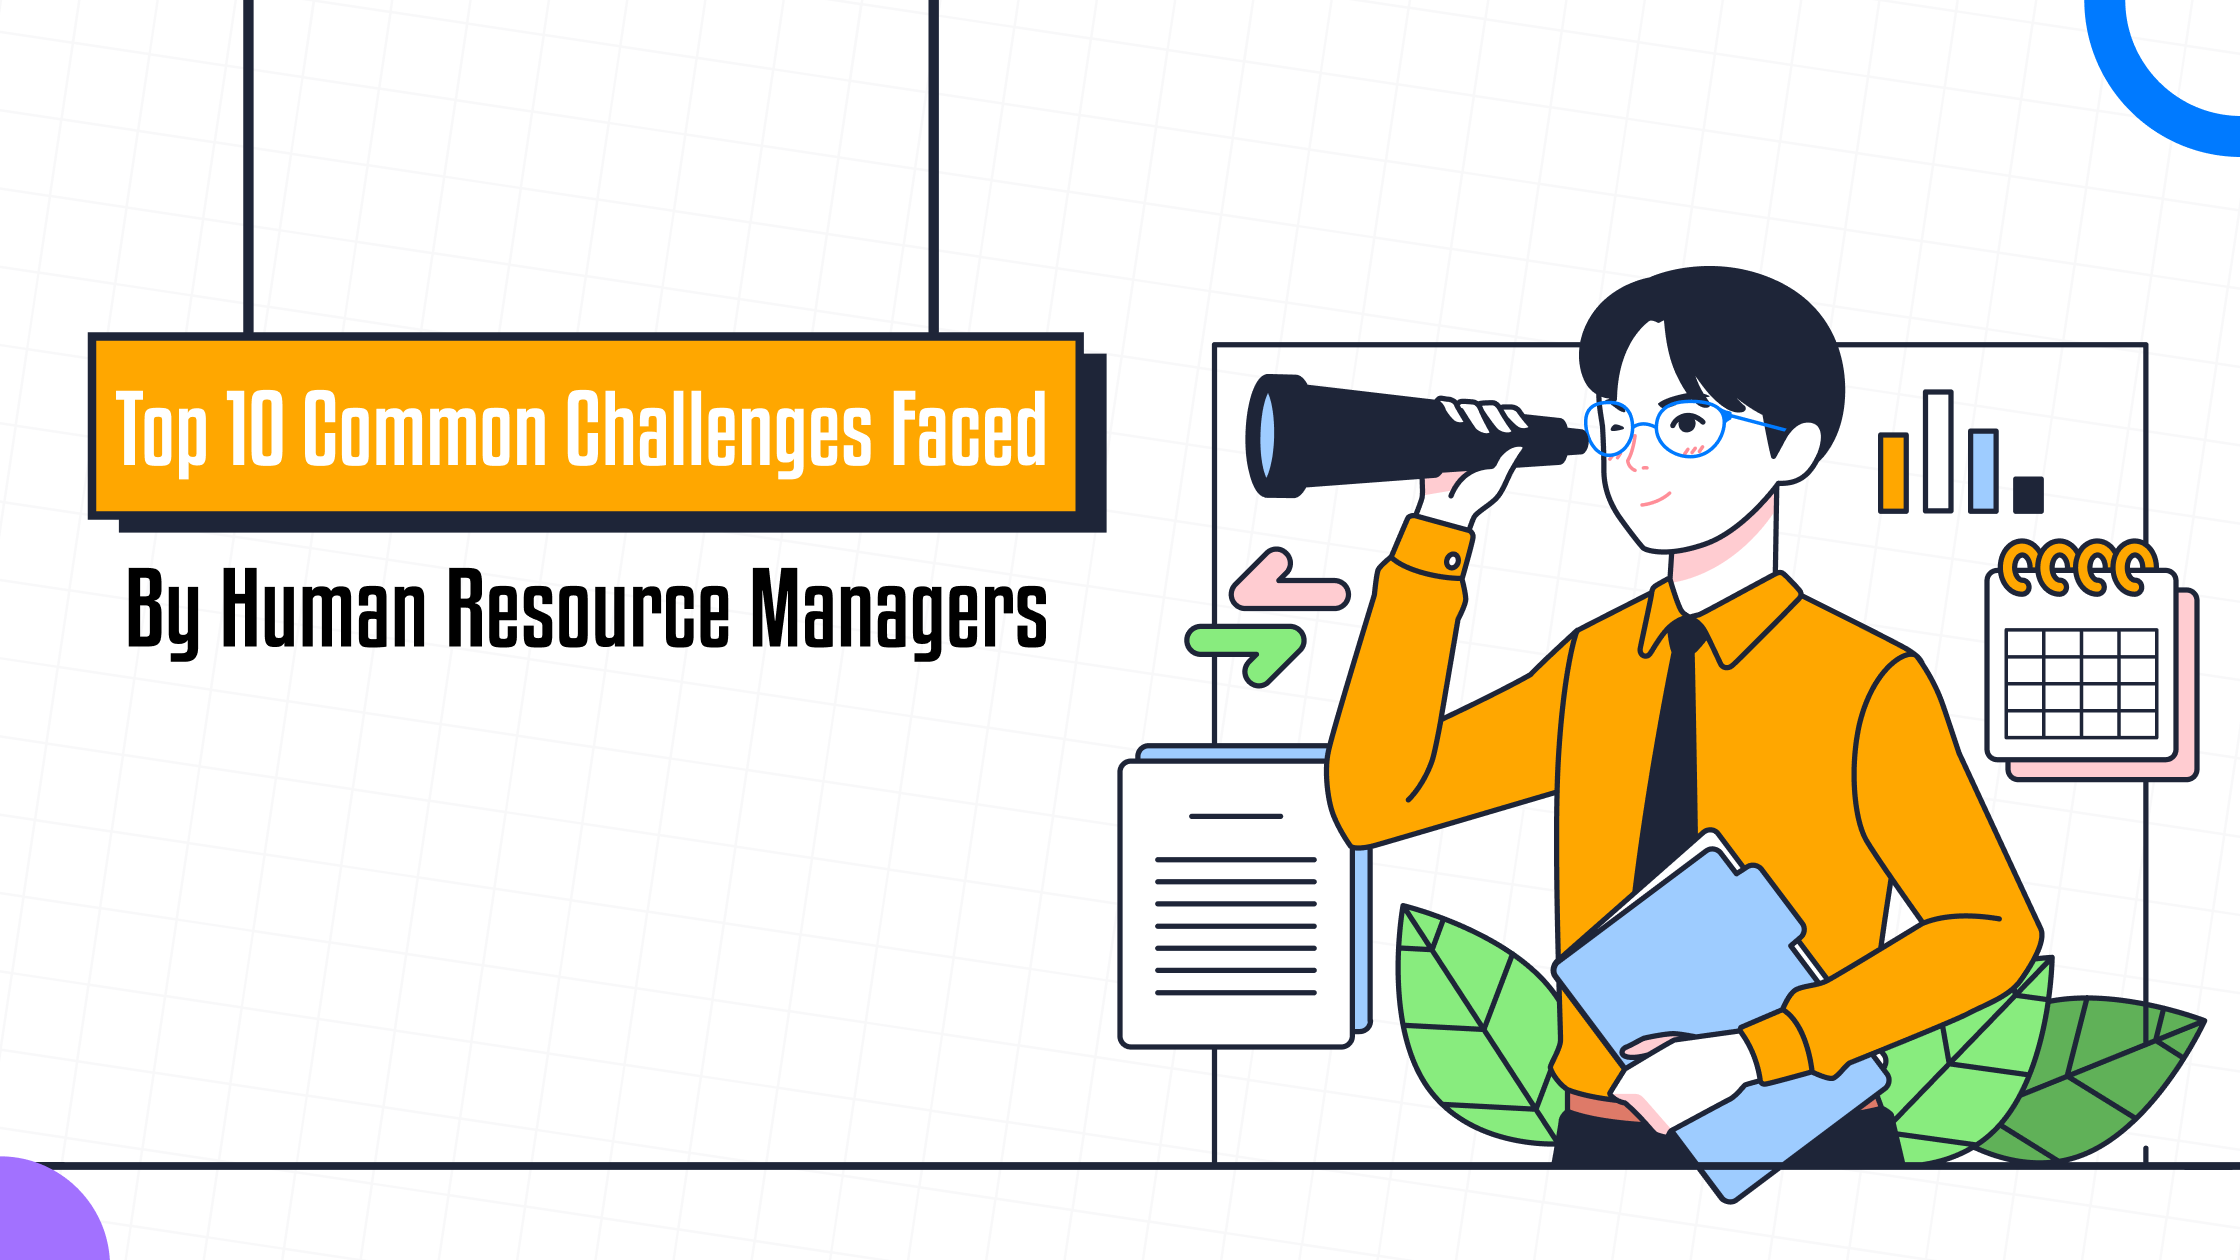 Top 10 Common Challenges Faced by Human Resource Managers